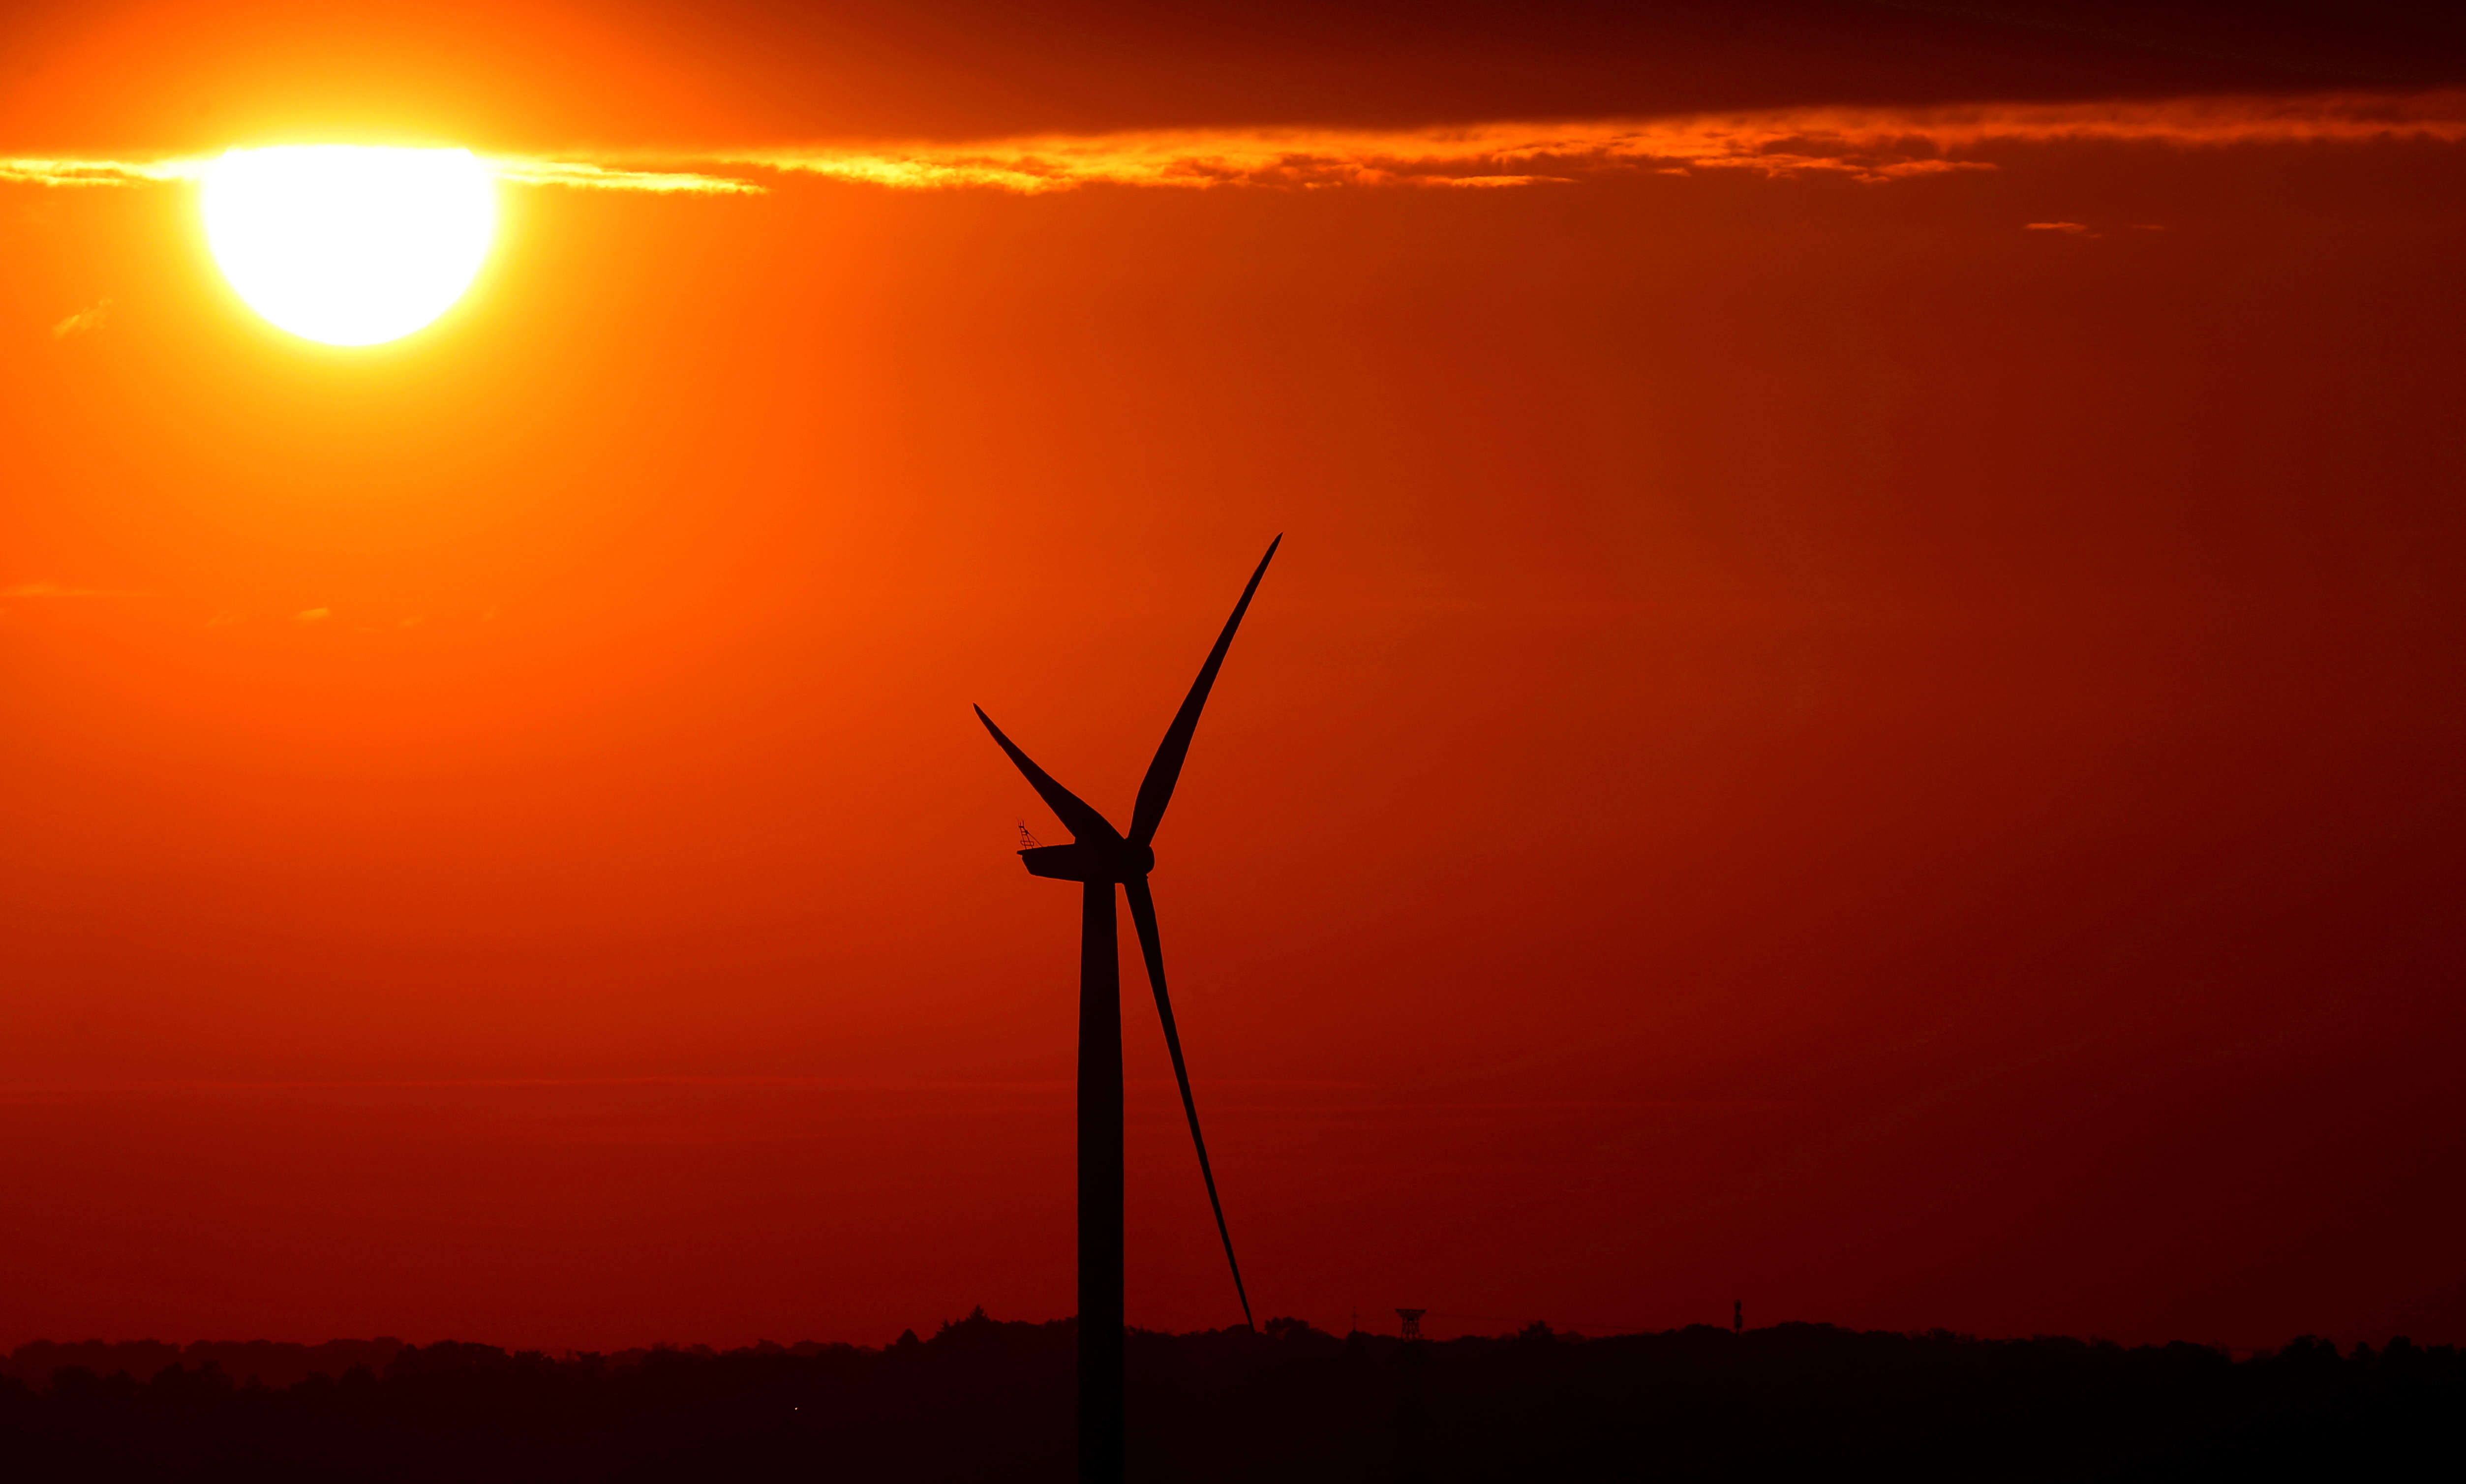 The sun rises behind an electric power windmill in Halle, Belgium September 11, 2019.